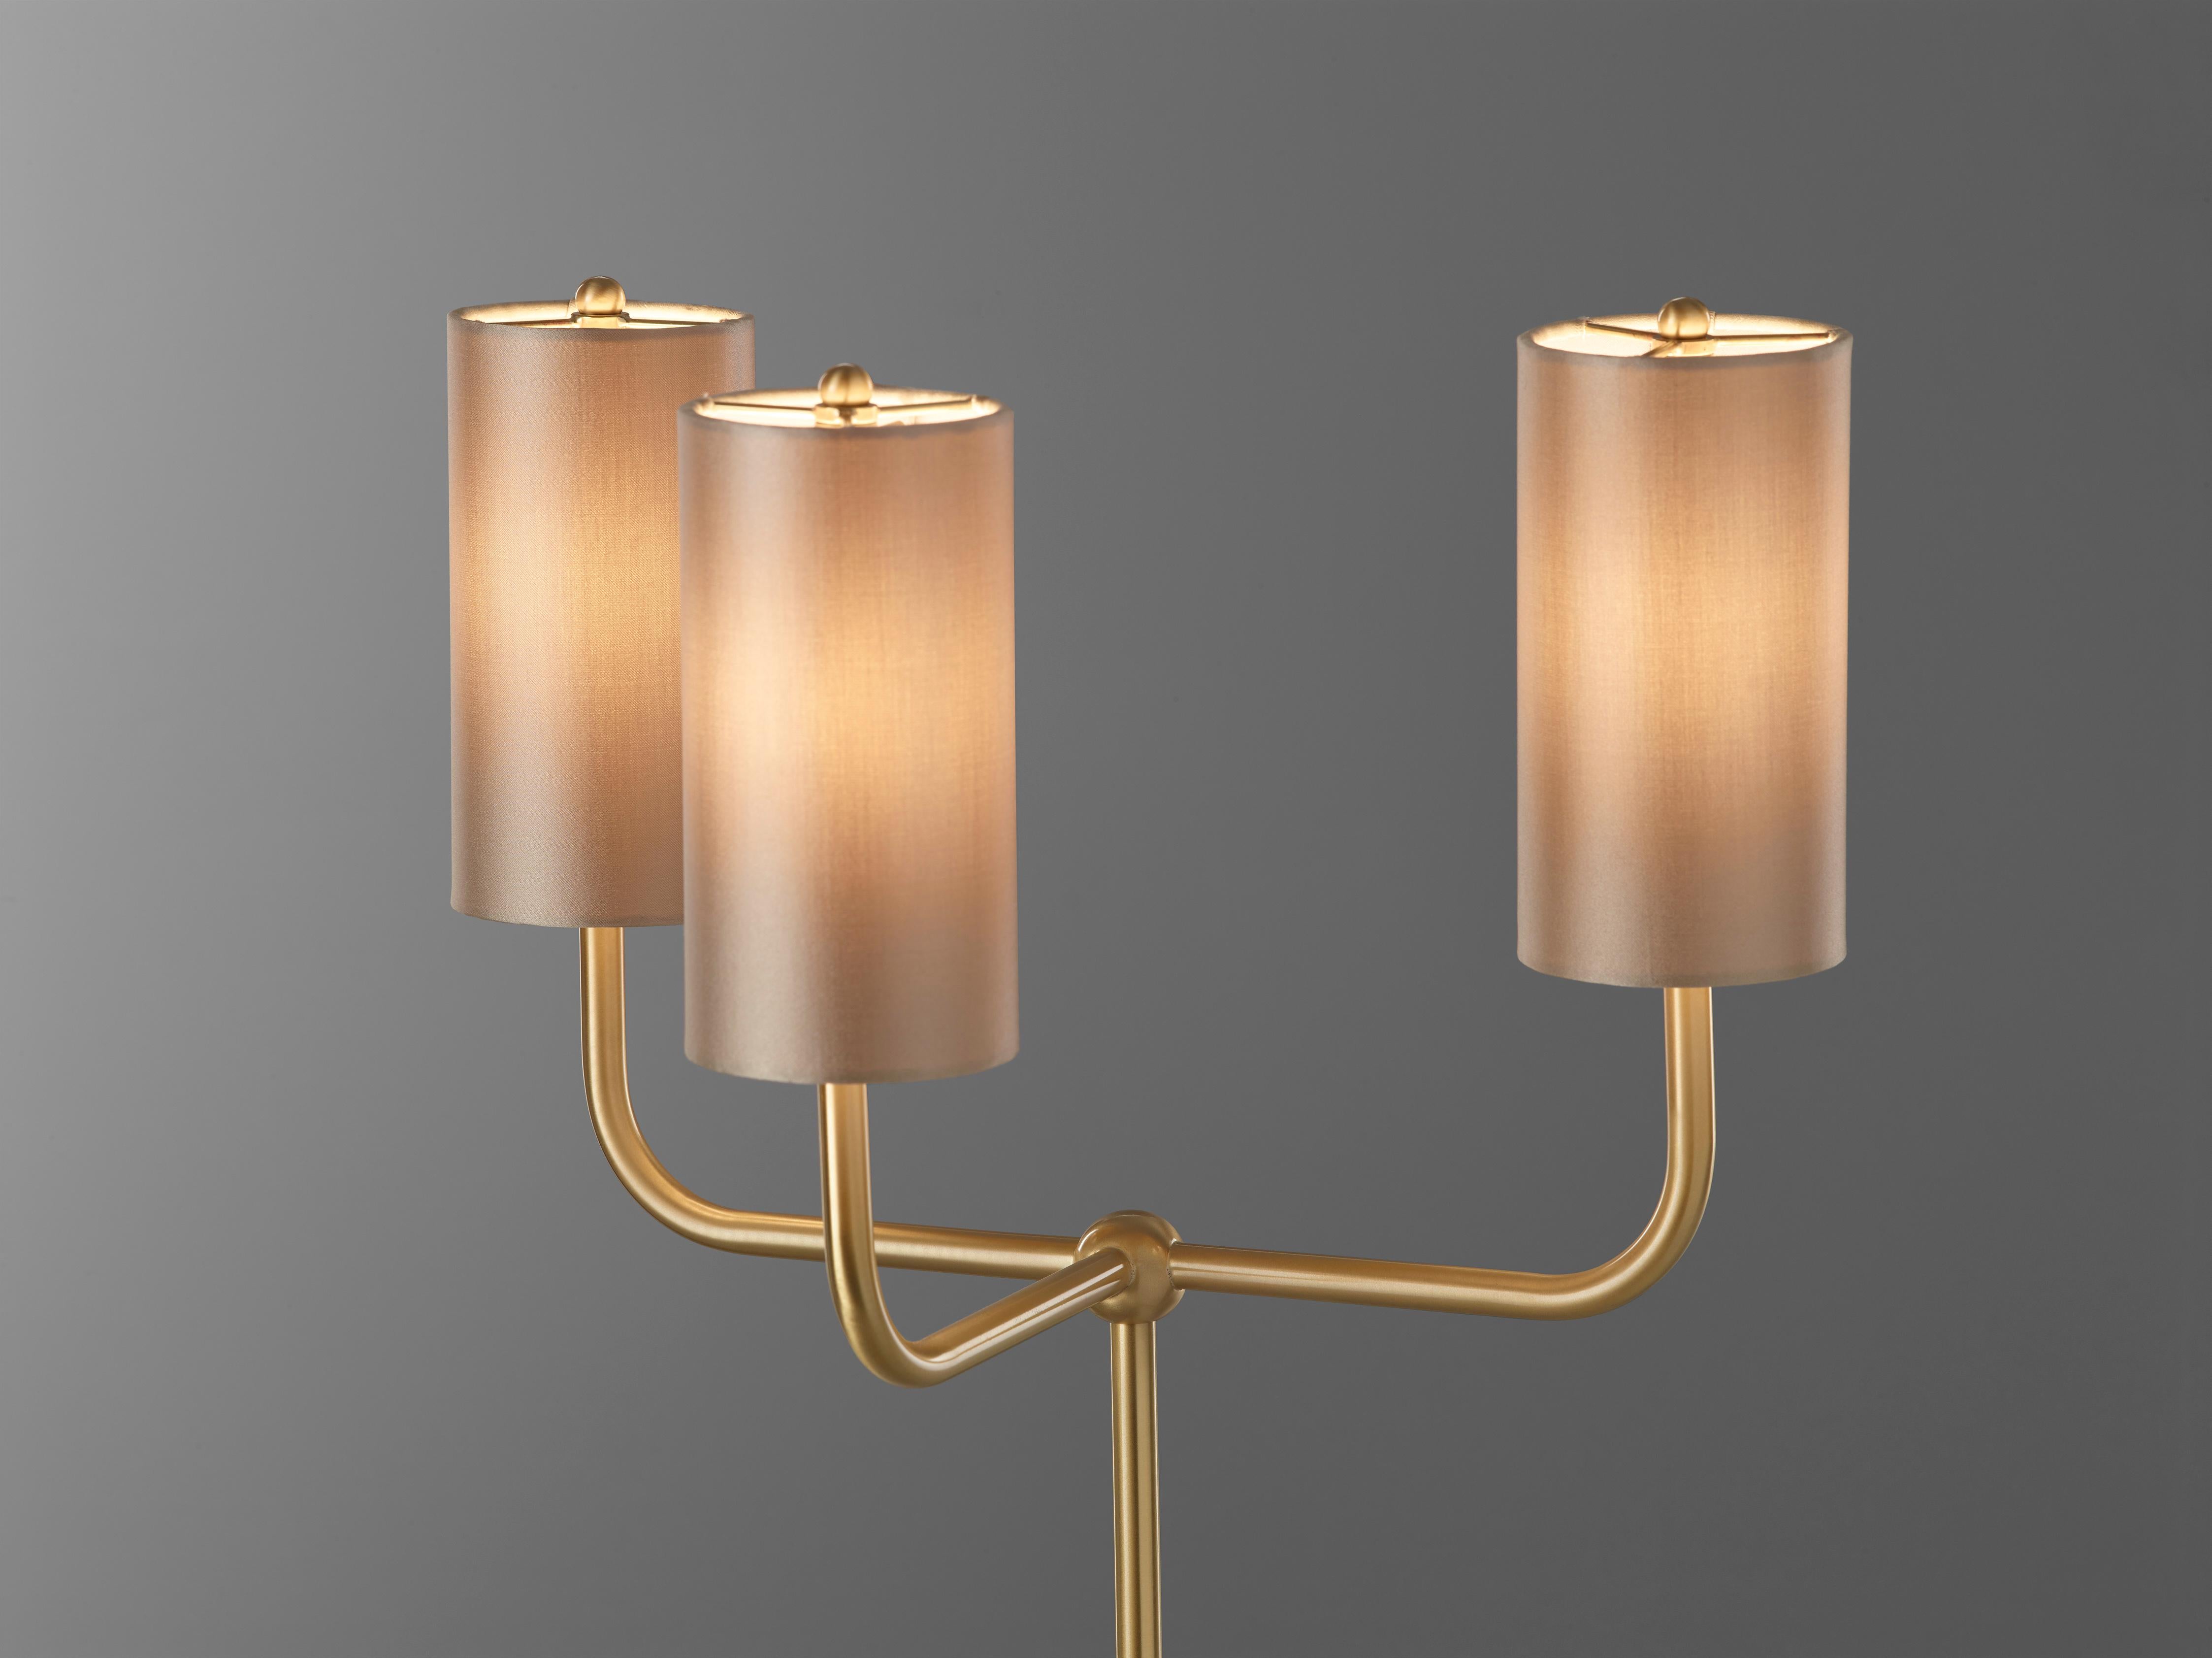 Contemporary Imagin Classic Floor Lamp in Brushed Brass and Fabric Shade. For Sale